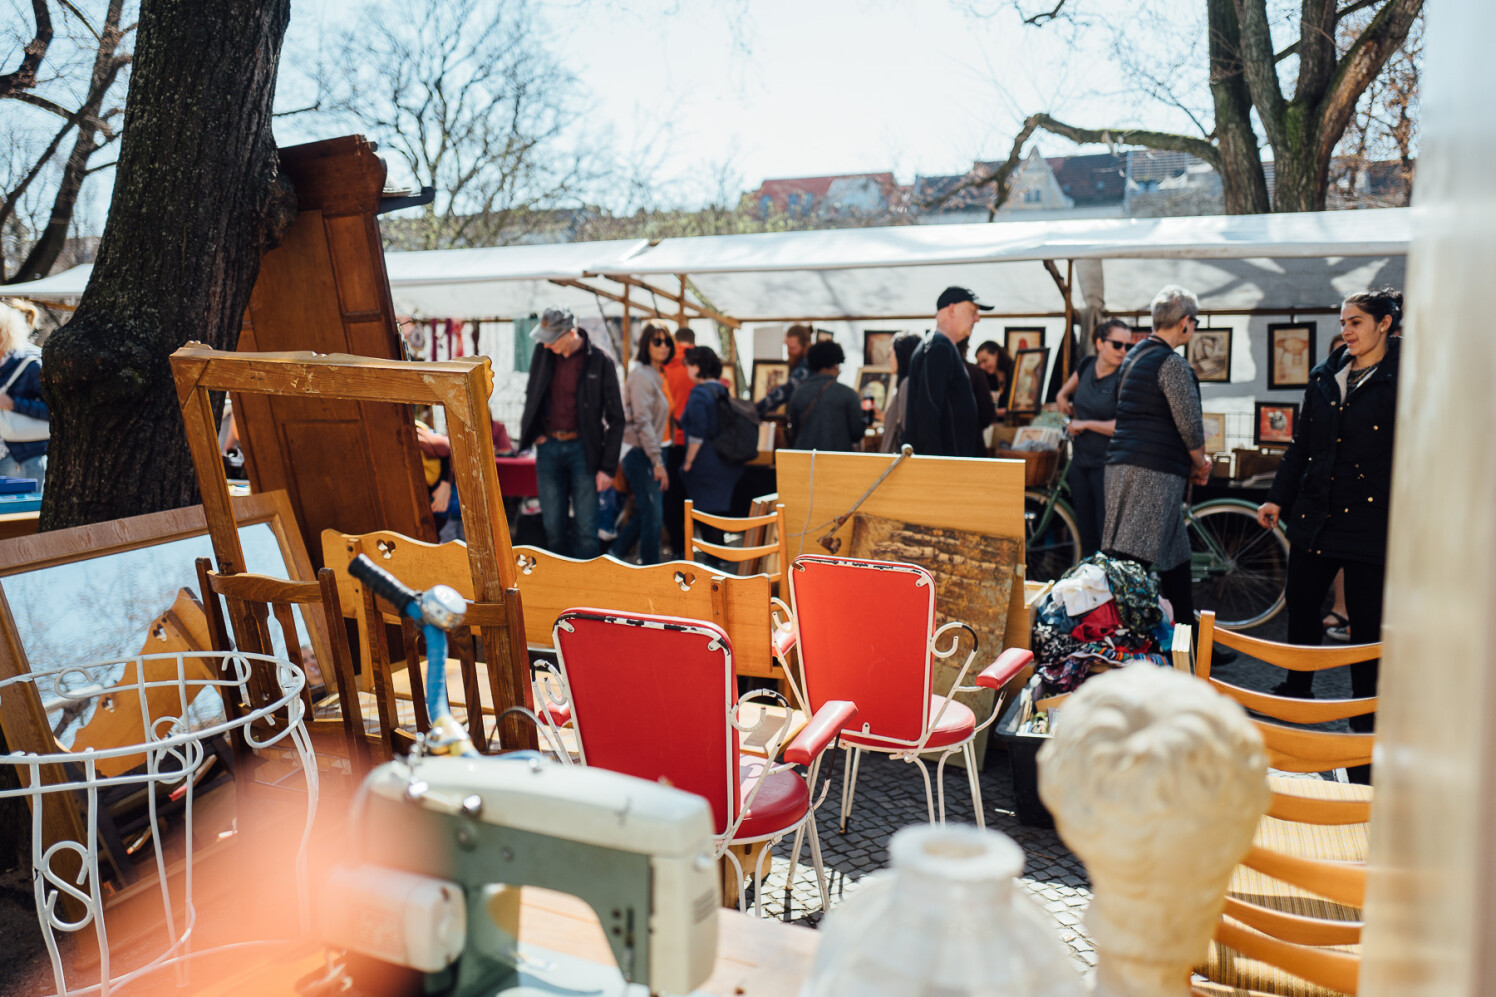 Two red chairs on a flea market